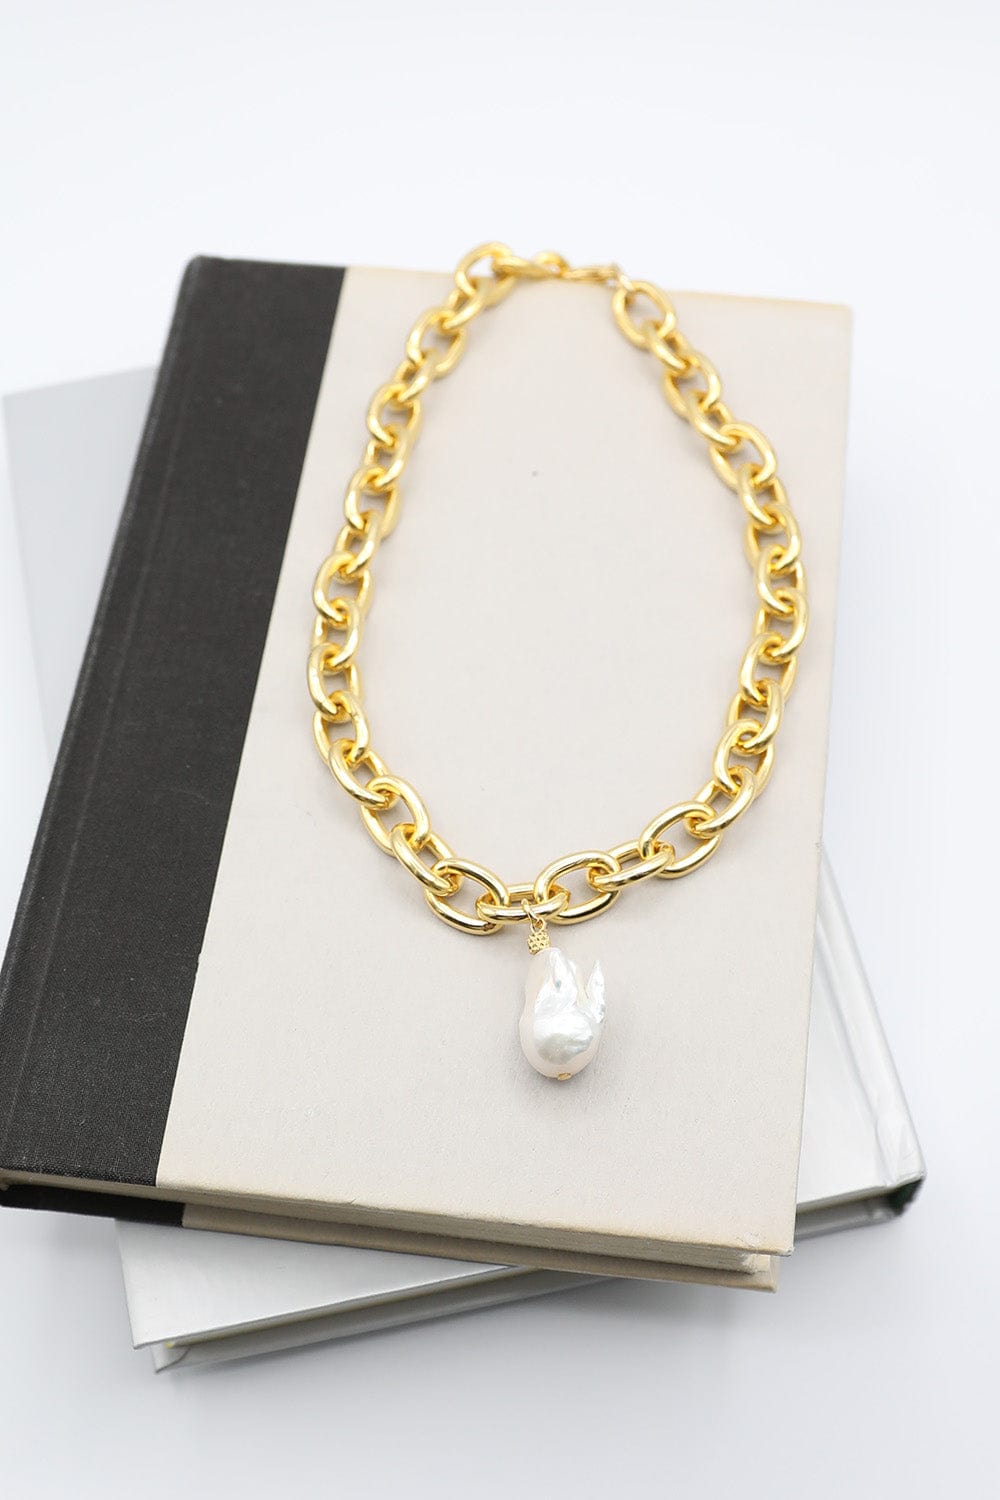 Necklace with Gold Chain and Large Baroque Pearl